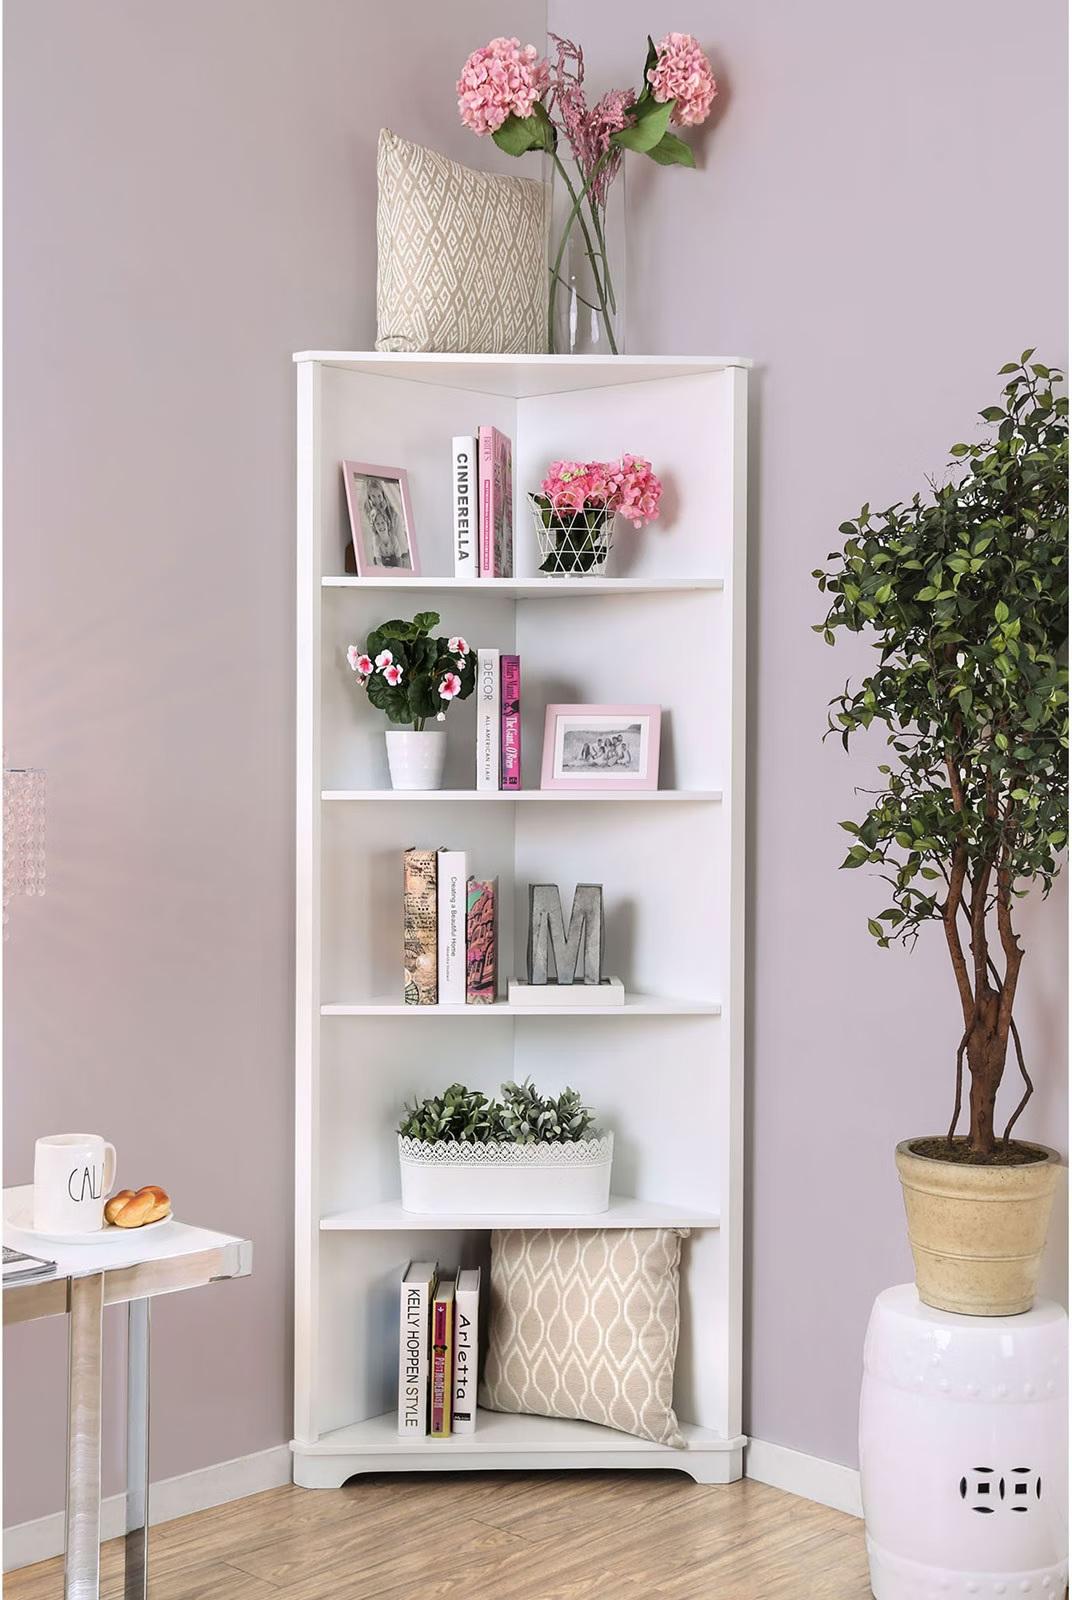 Transitional Bookshelf CM-AC806WH Rockwall CM-AC806WH in White 